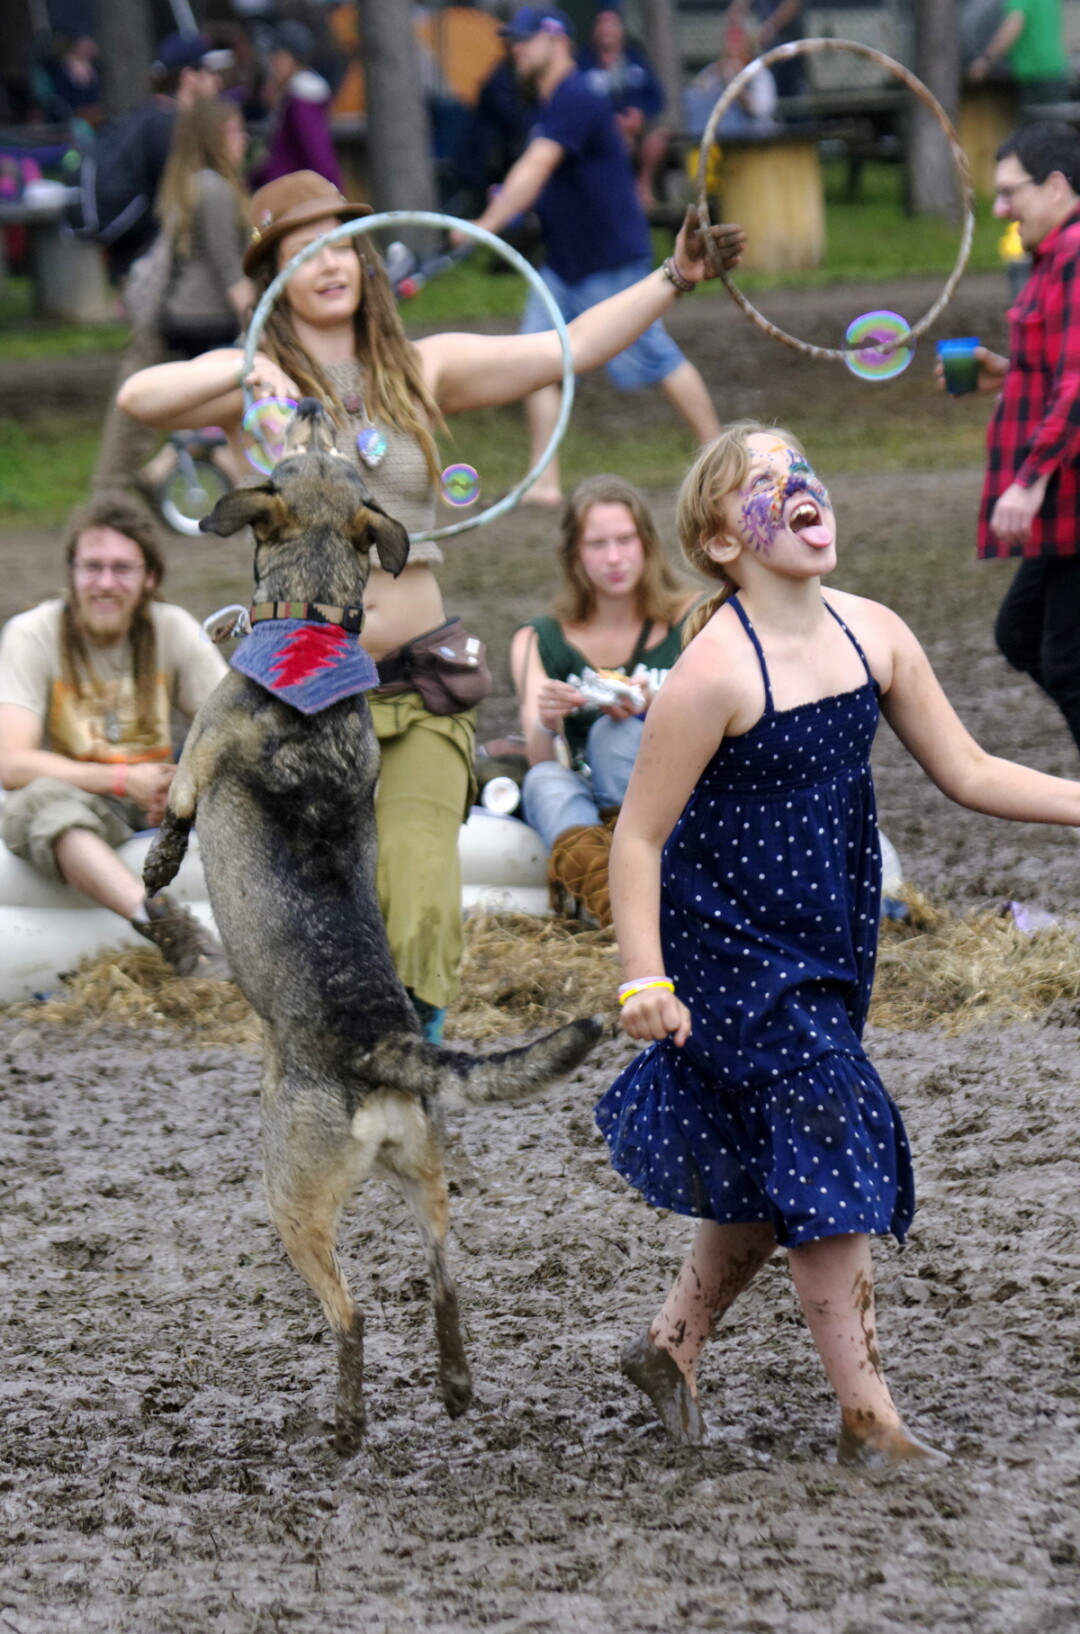 IT’S A DOG-GONE MUD PARTY. It rained for a good chunk of Blue Ox, the Chippewa Valley’s new three-day outdoor music festival. The bluegrass-focused fest celebrated the best in the genre, right outside of Eau Claire June 11-13. The fest featured big name performers and ... lots and lots of mud.